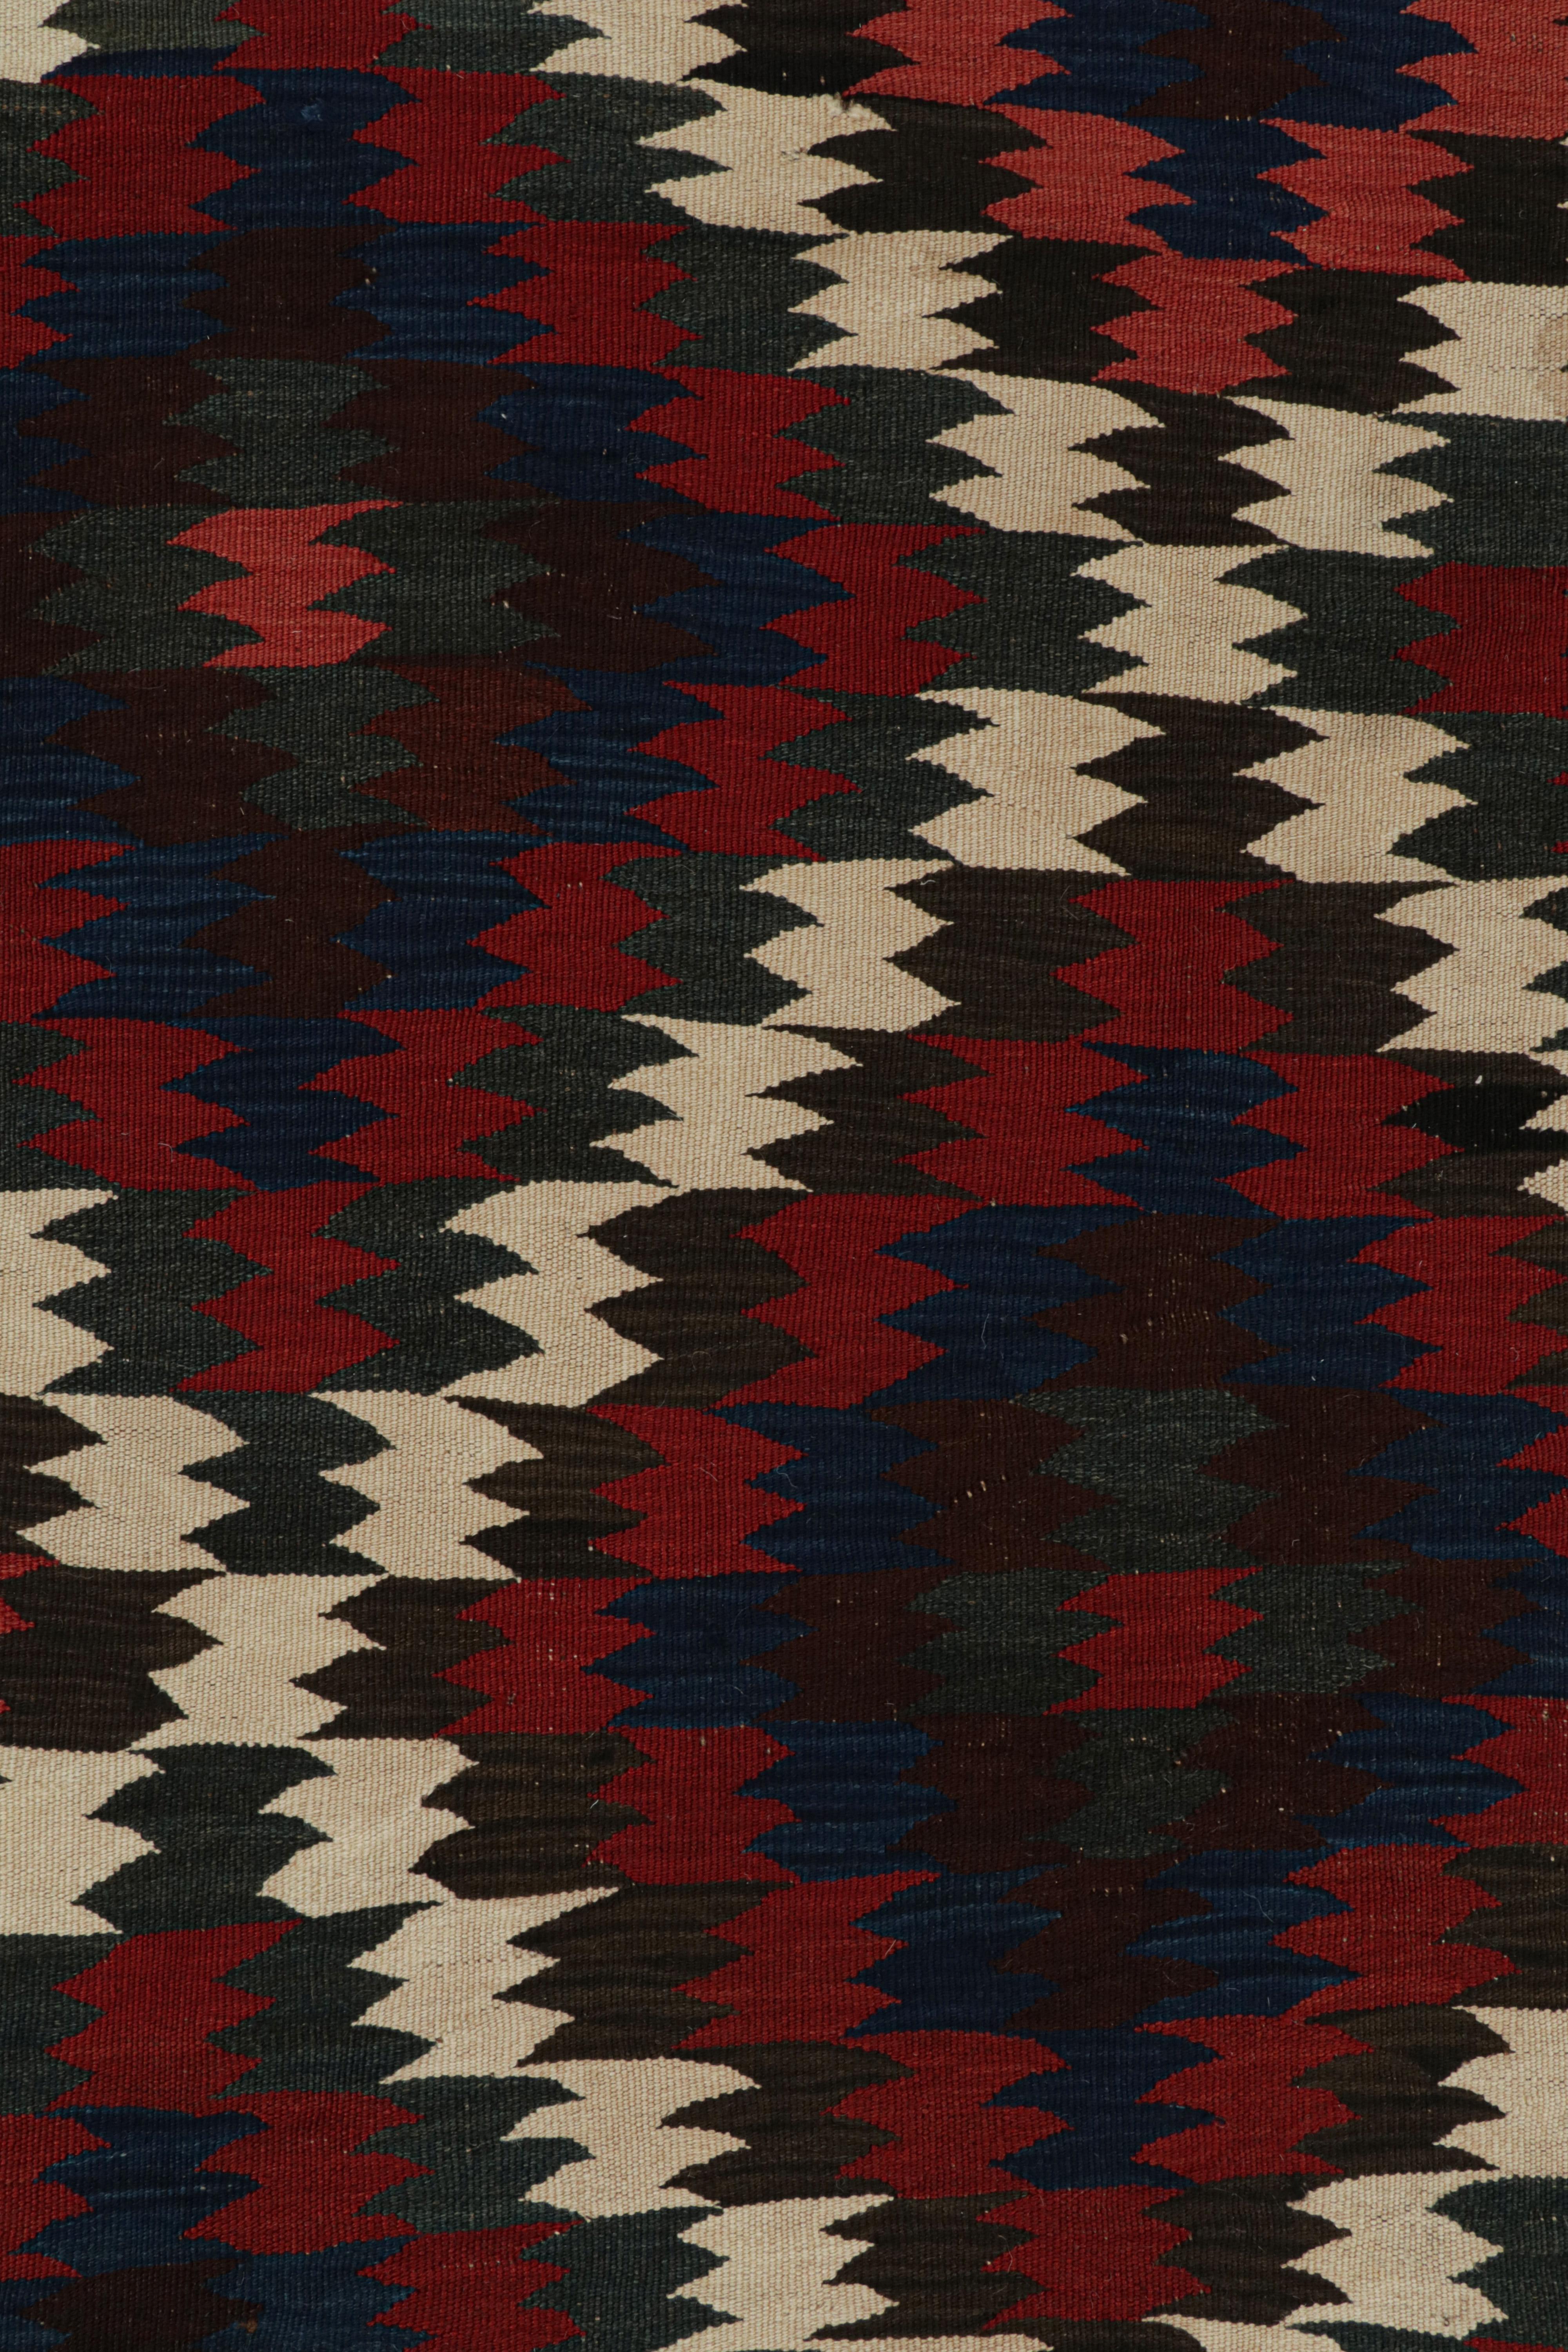 Wool Vintage Kilim with Red, Teal and Blue Geometric Patterns, from Rug & Kilim  For Sale